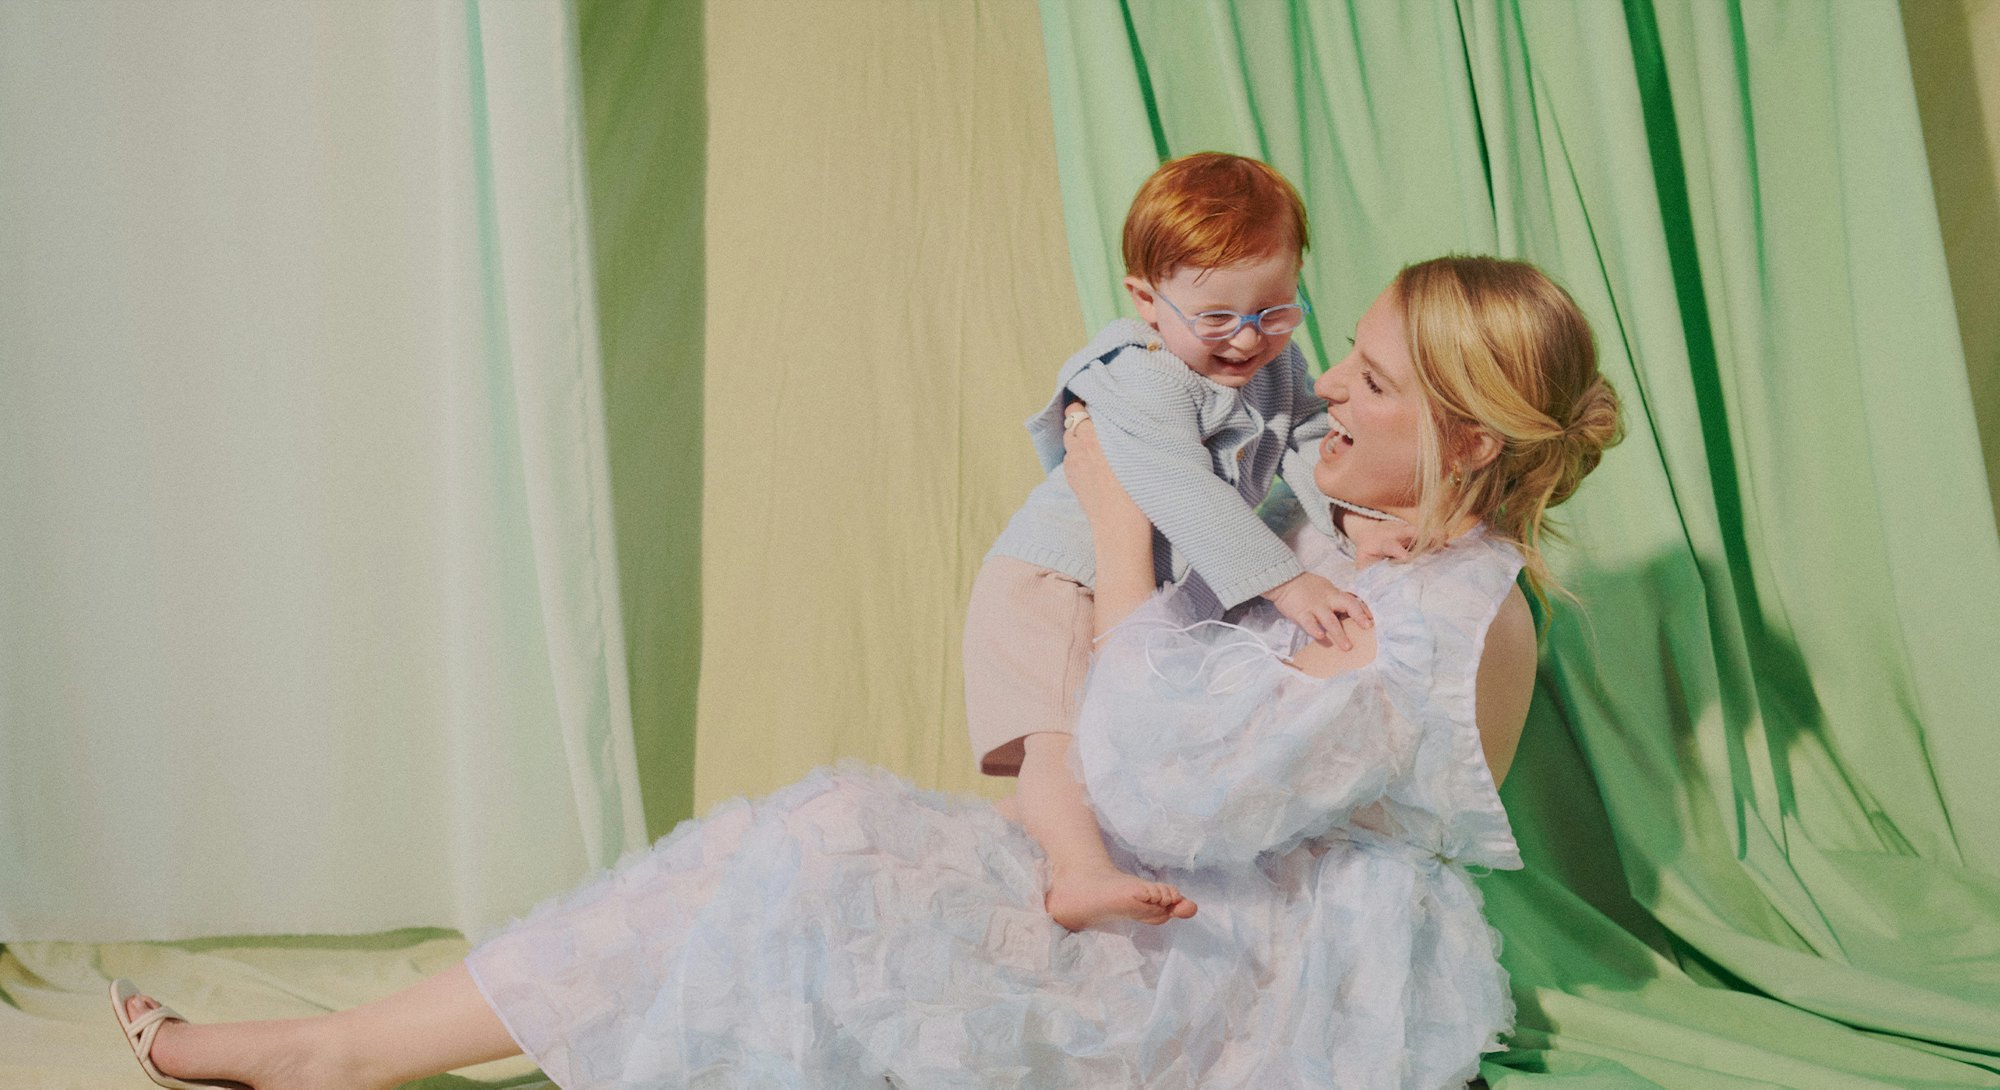 Meghan Trainor sitting on the ground in a white dress, playfully holding her son with green curtains...